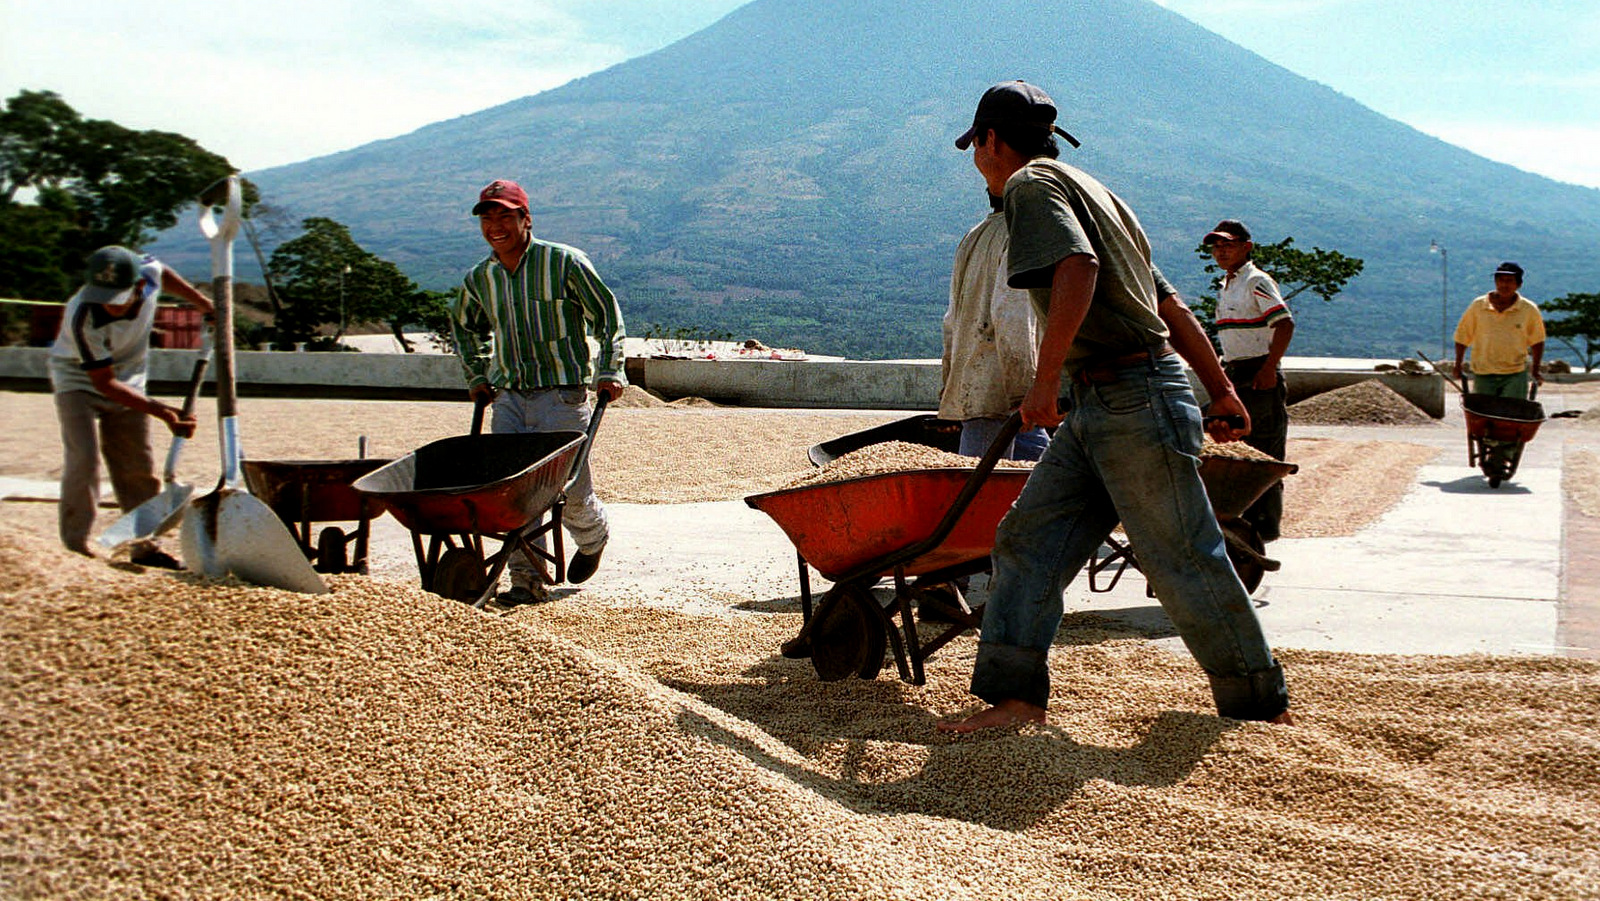 Workers haul coffee beans at a plantation in Alotengango, Guatemala. Coffee is the main export for Guatemala and a boycott from Arab countries that import large amounts of coffee and cardomam could have real economic consequences for the country. (AP/Moises Castillo)